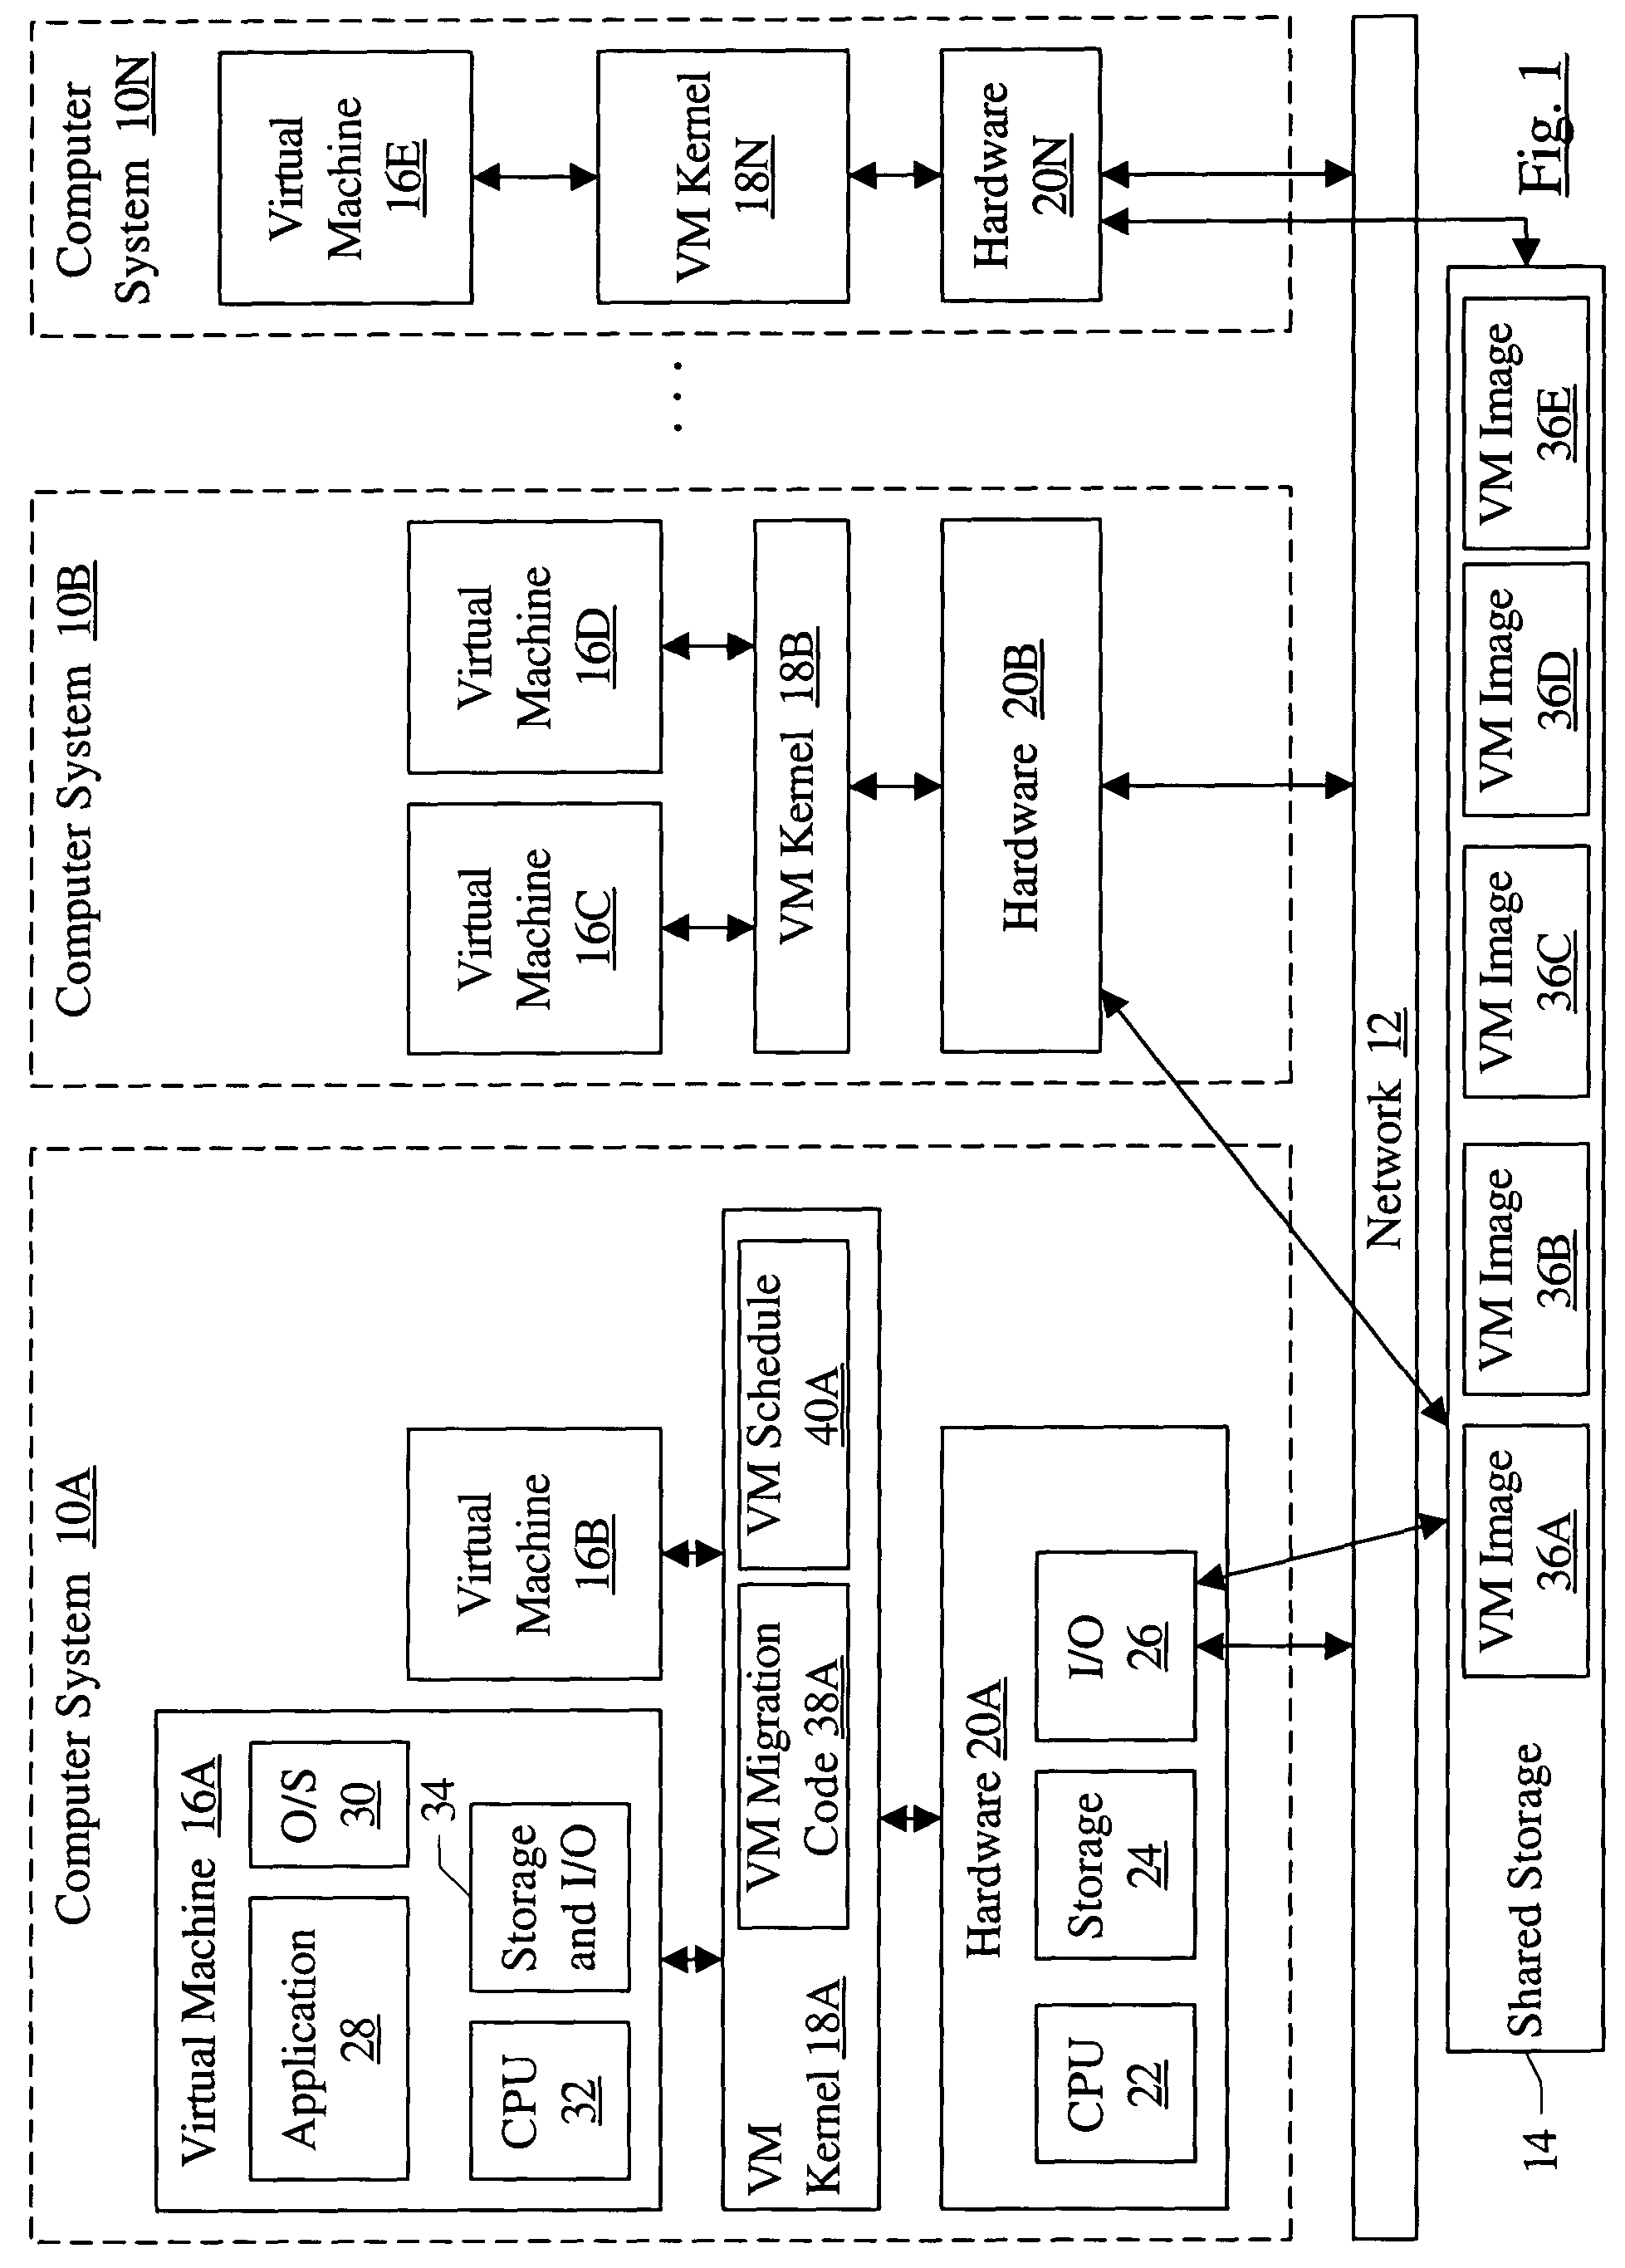 Migrating virtual machines among computer systems to balance load caused by virtual machines